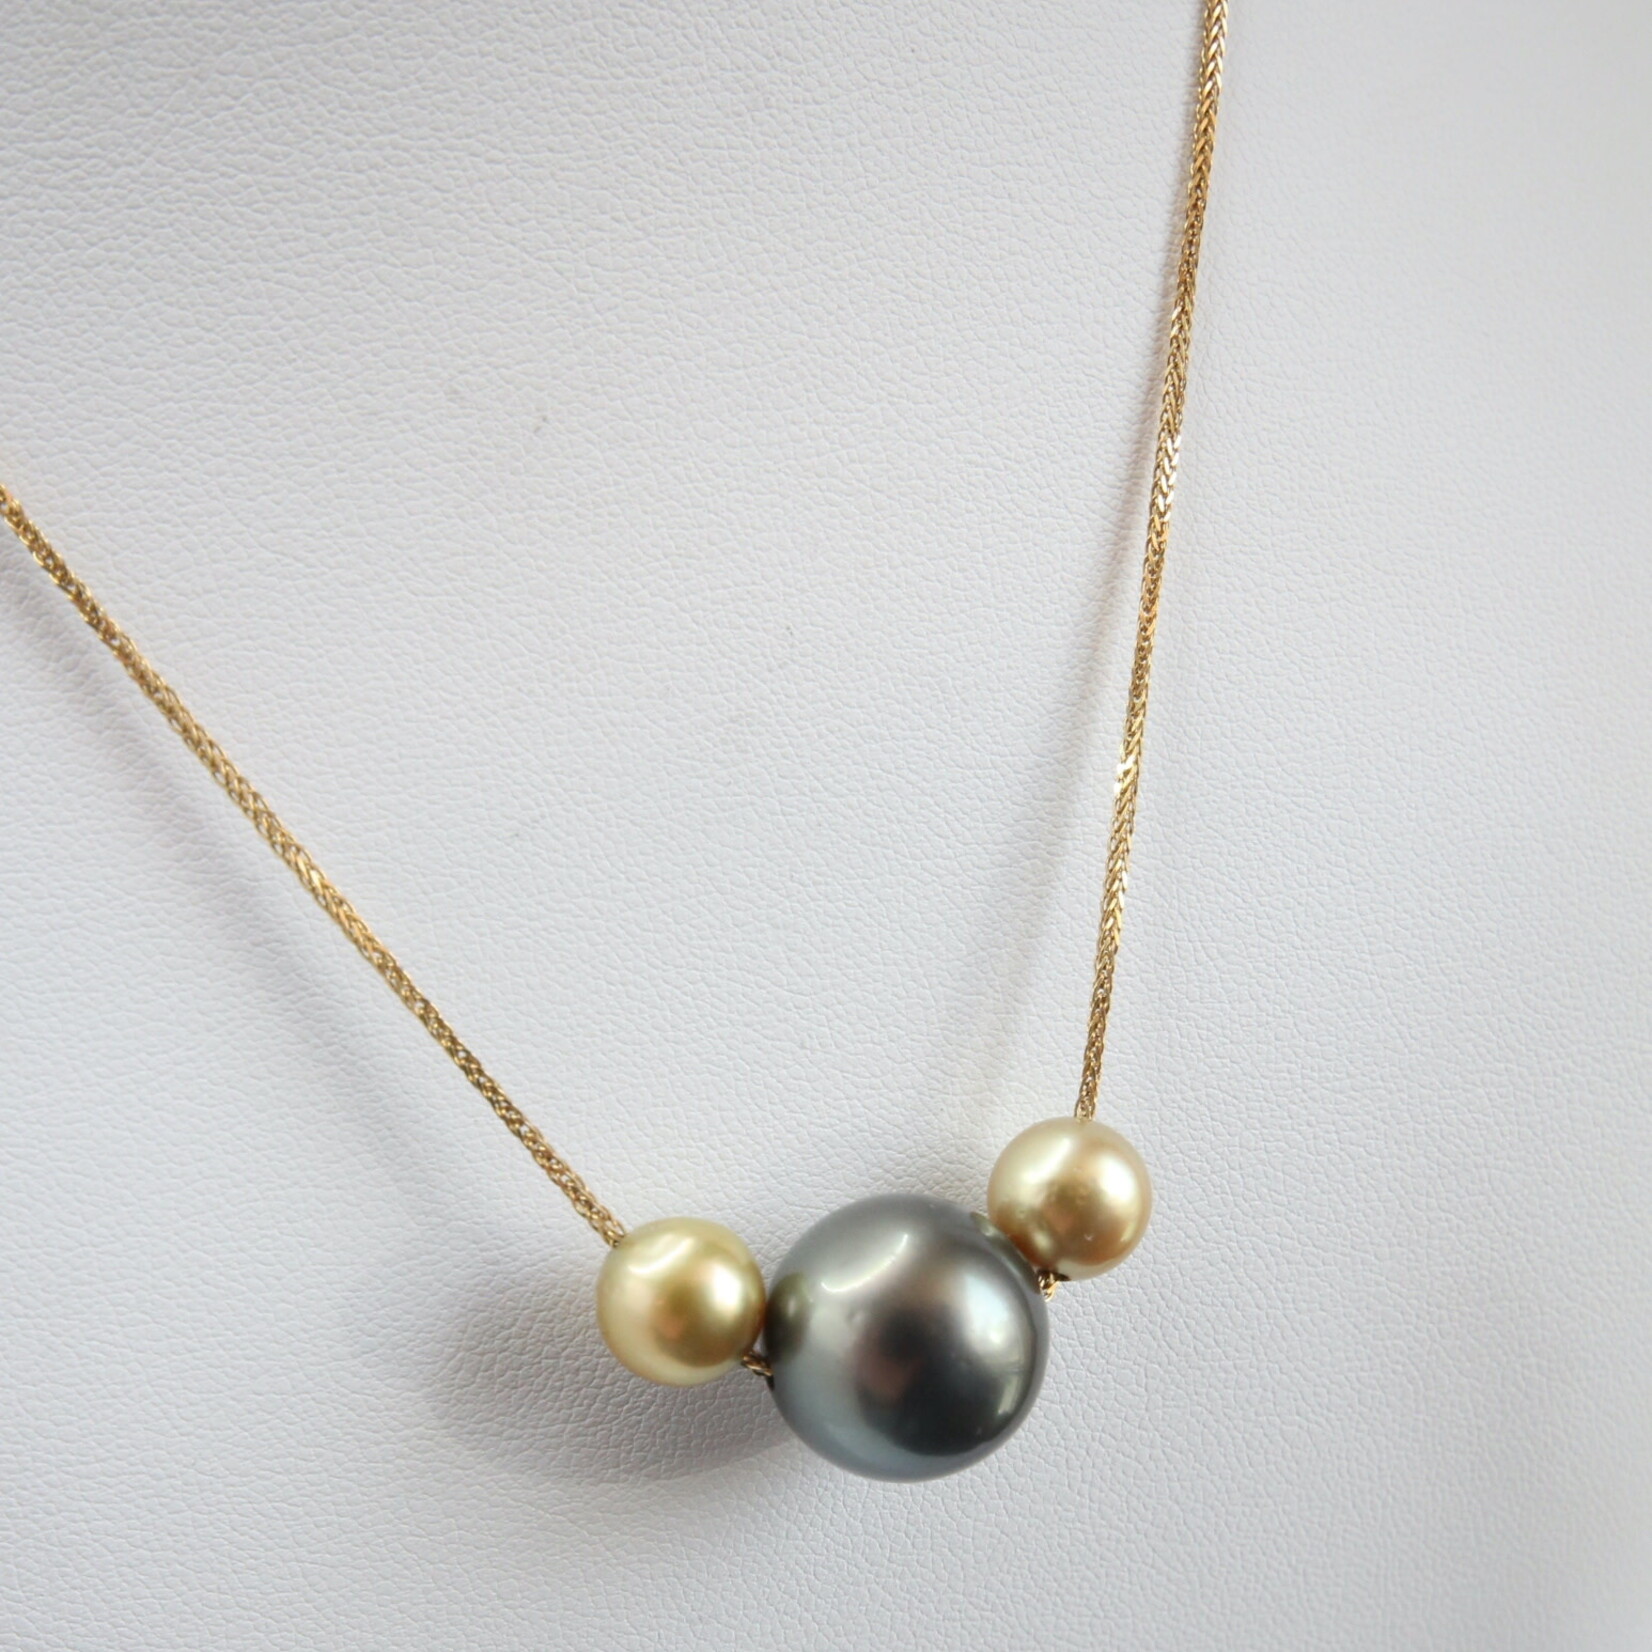 Large Round Tahitian & Yellow South Sea Pearls on Gold Chain